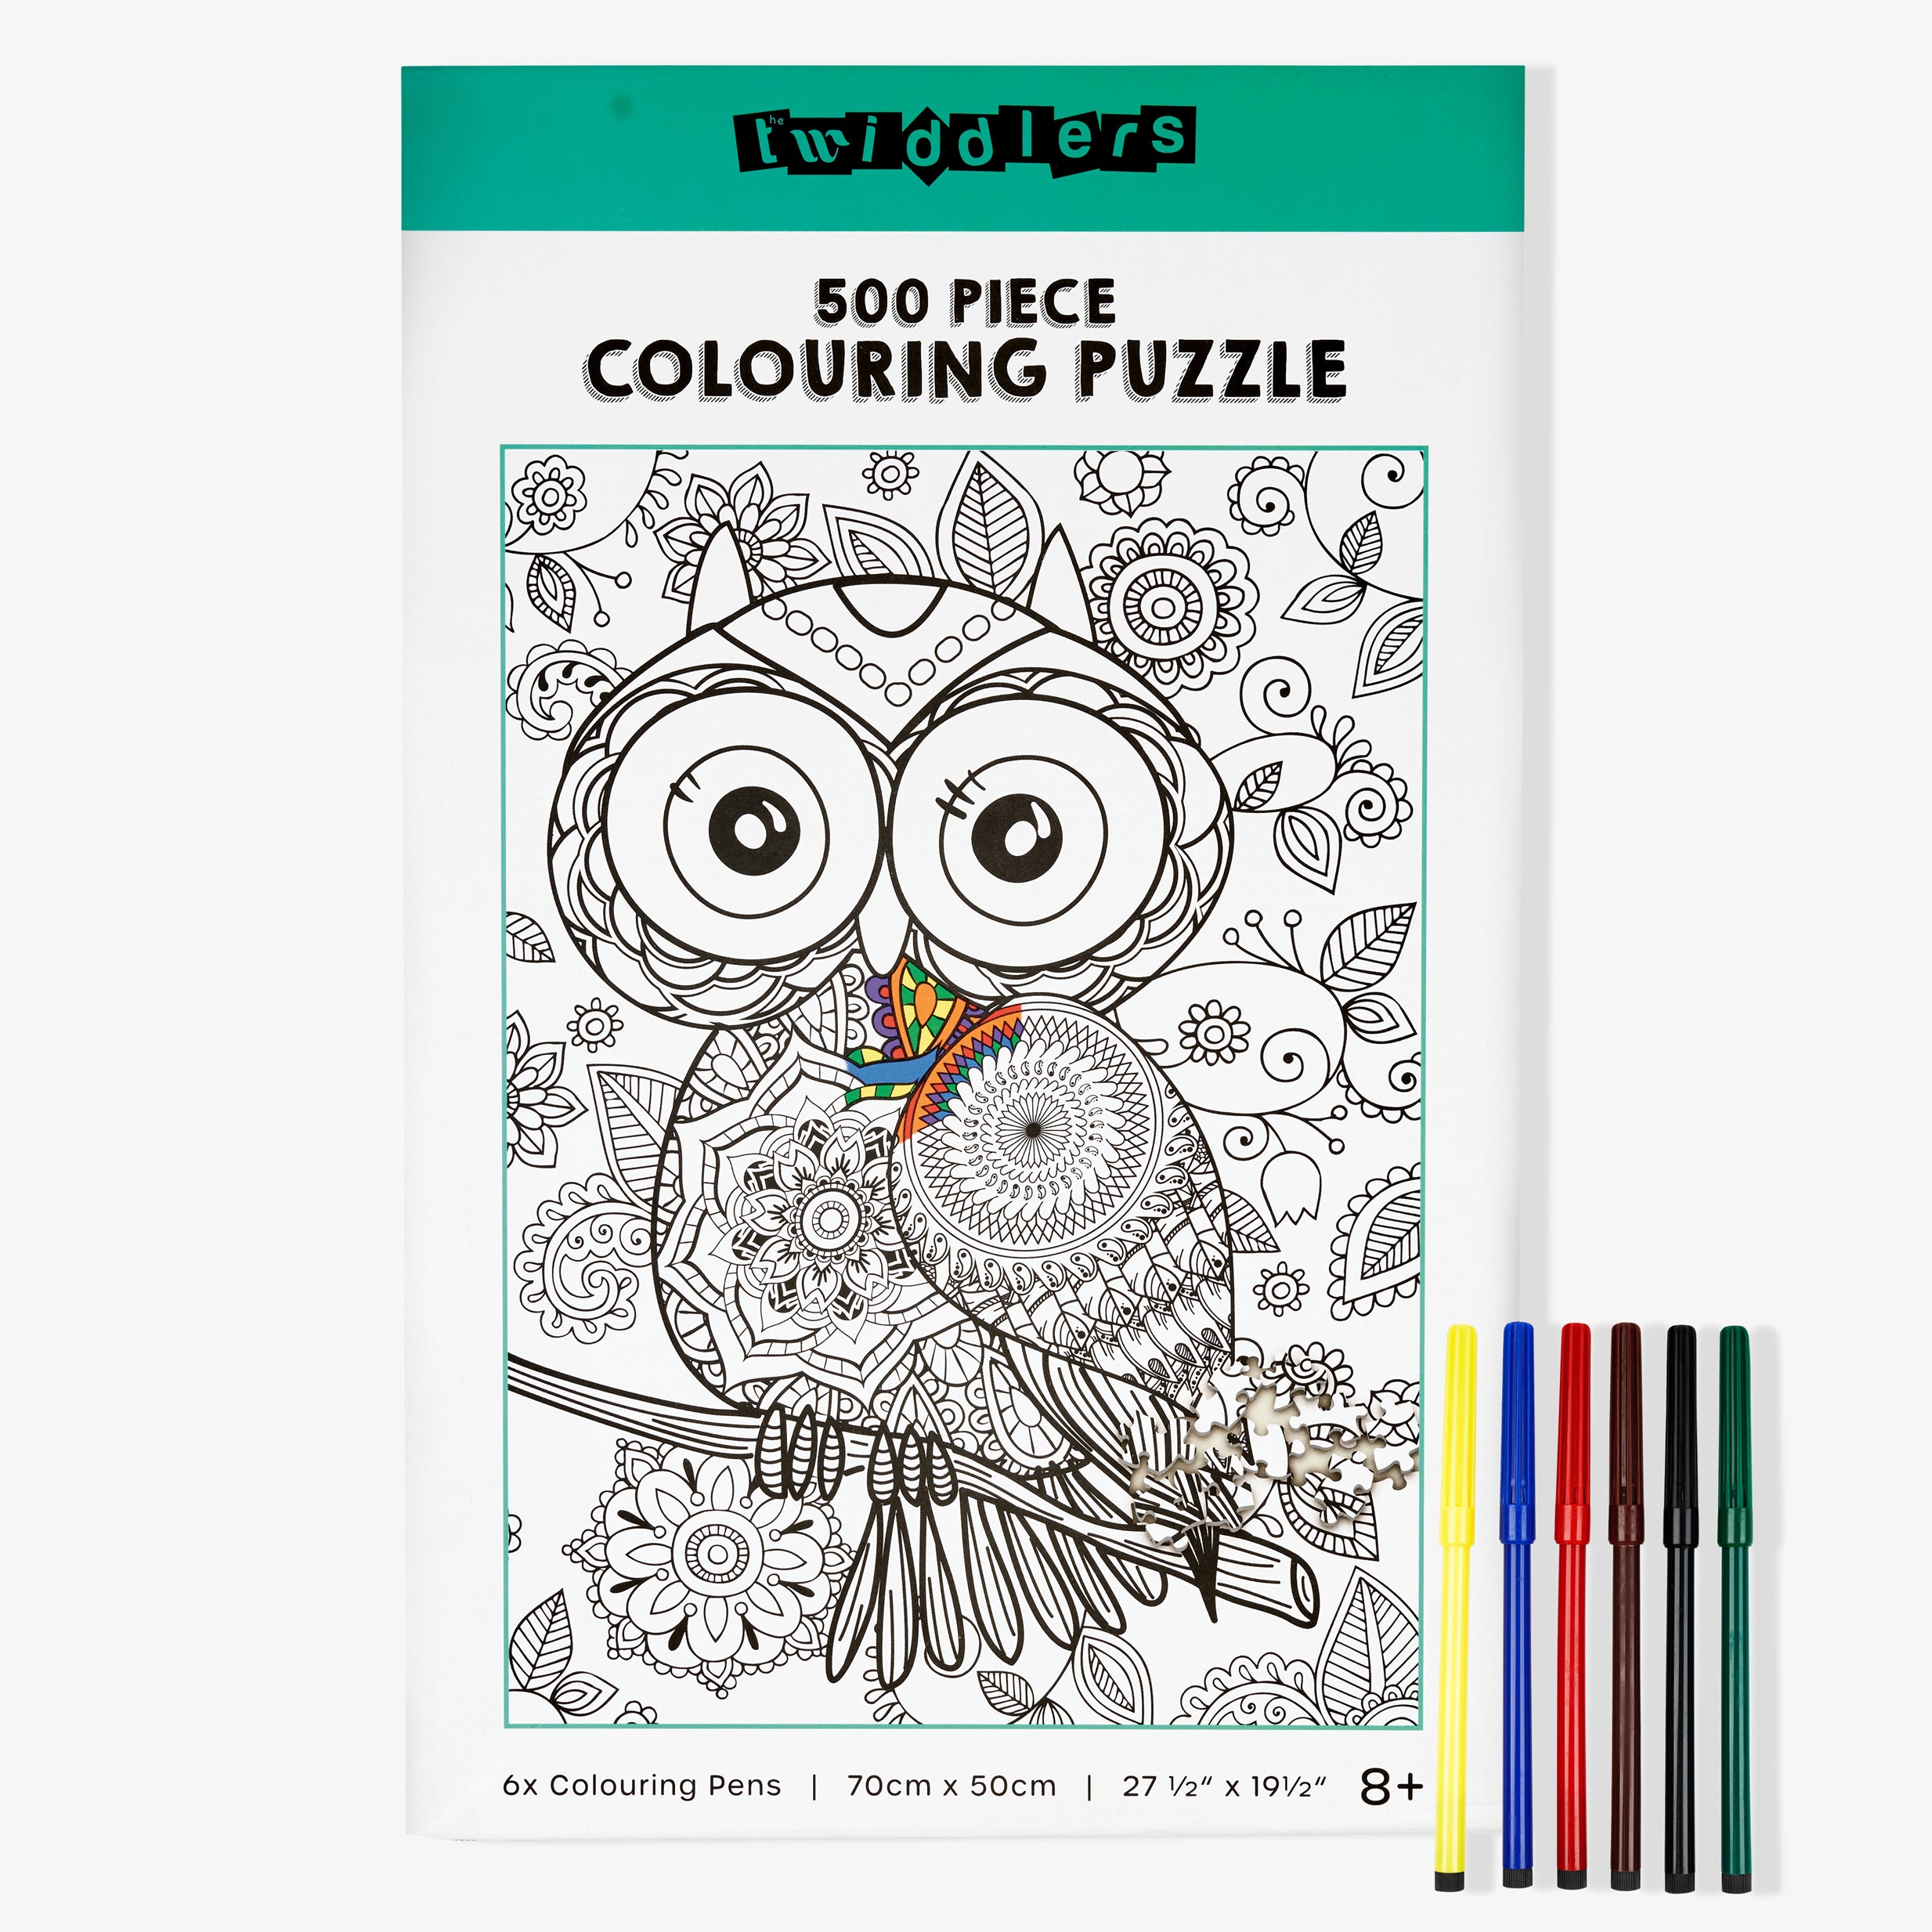 500pcs Colour-in Owl Puzzle with 6 Pens